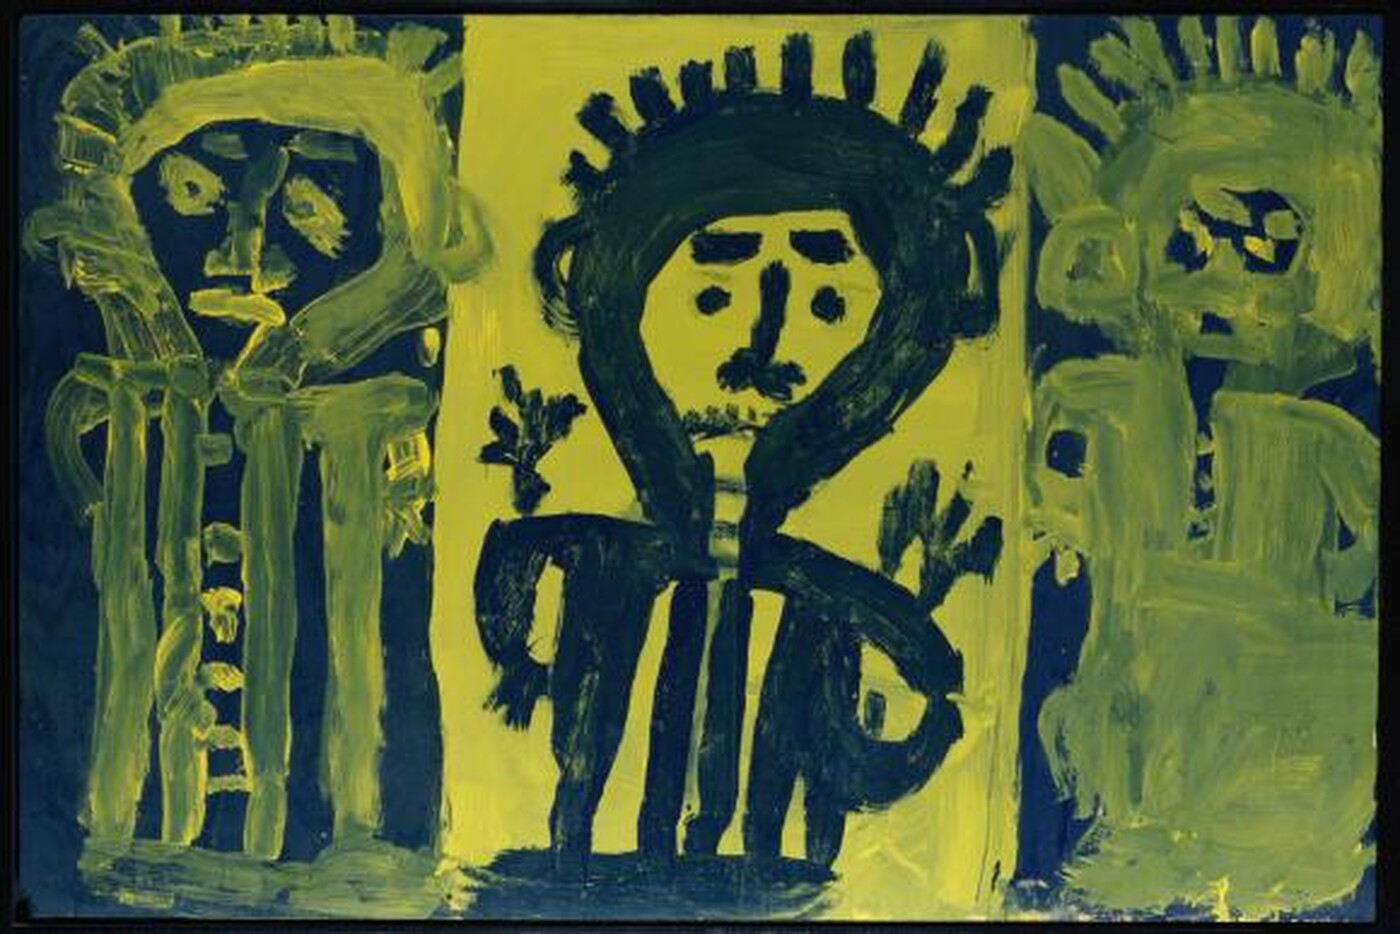 A painting in a child-like style with three figures (L-R): A human figure in yellow on black, a human figure in black on yellow, and another human figure in yellow on black.